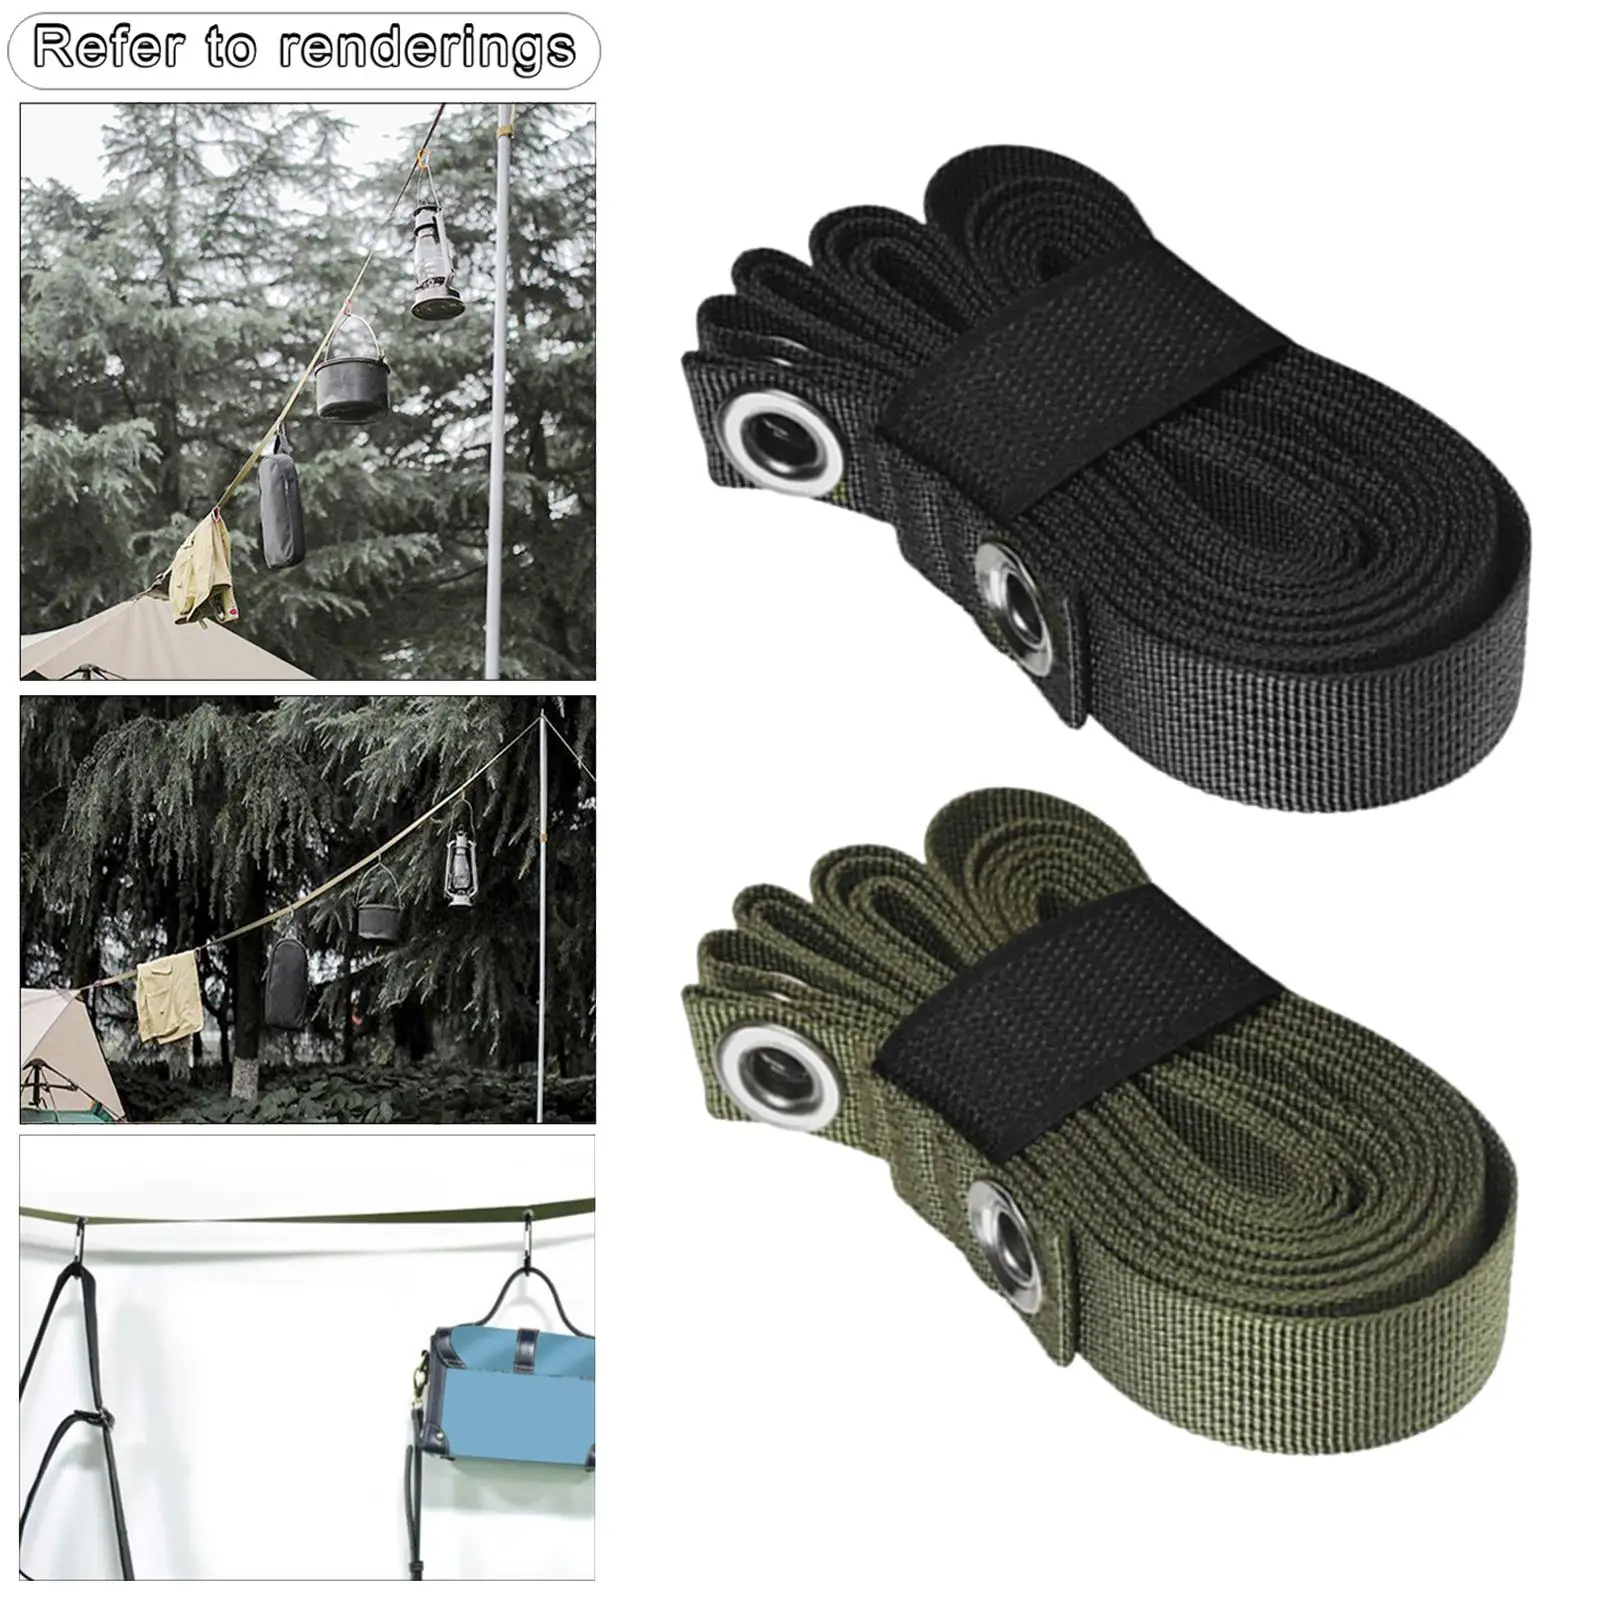 Portable Tent Canopy Lanyard Outdoor Camping Equipment Travel Hanging Rope Hanger Organiser Clothesline